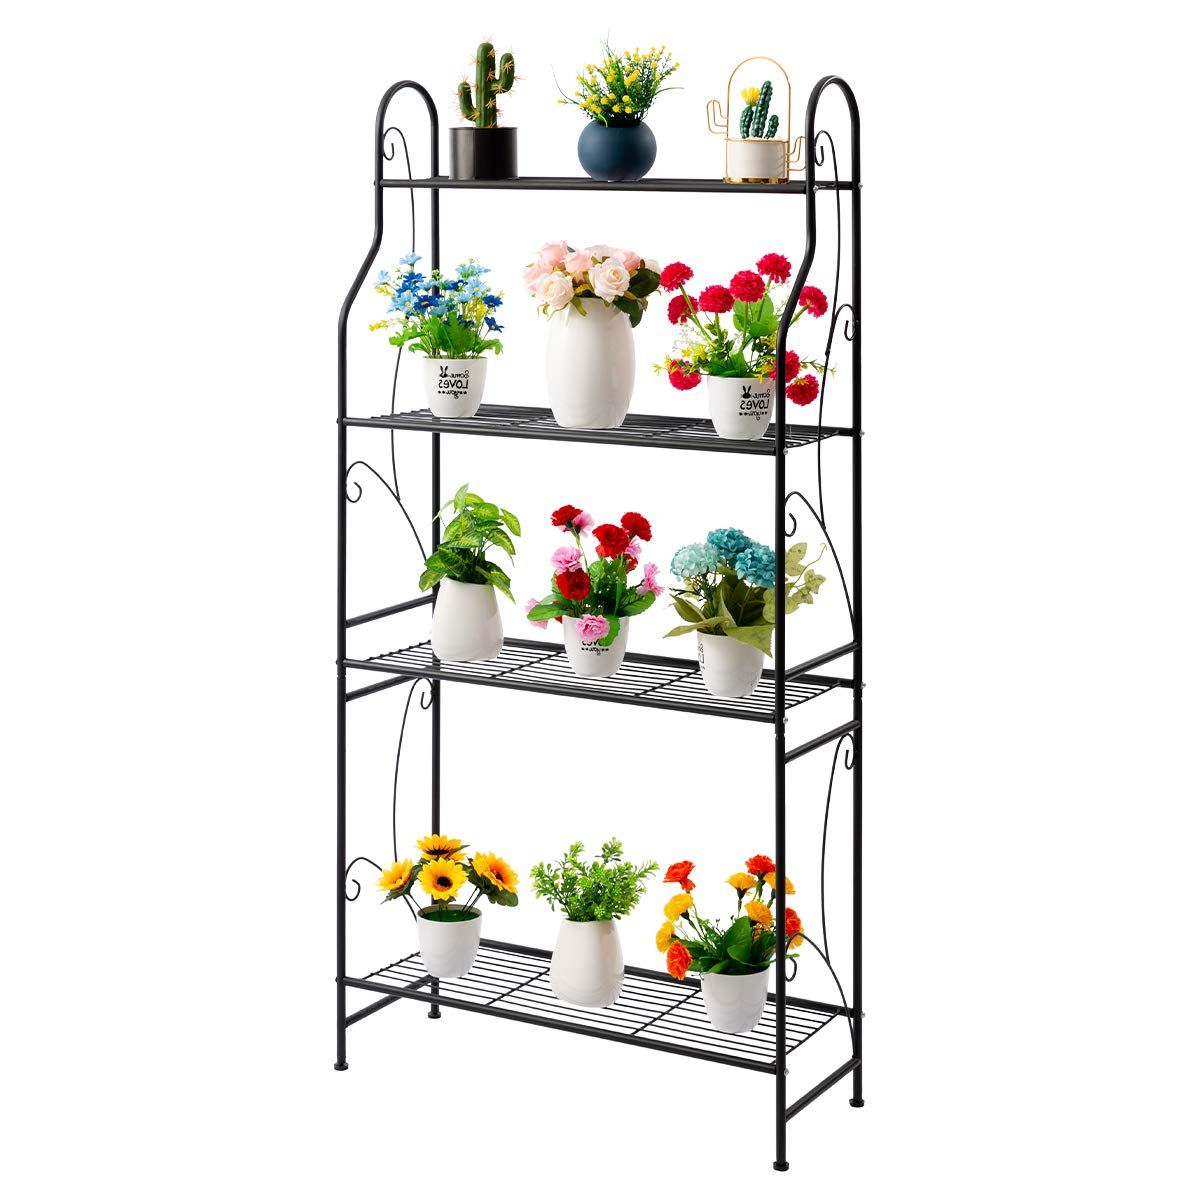 Four Tier Metal Plant Stands Within Latest Doeworks 4 Tier Metal Plant Stand, Plant Display Rack, Ladder Shaped Stand  Shelf, Pot Holder For (View 2 of 10)